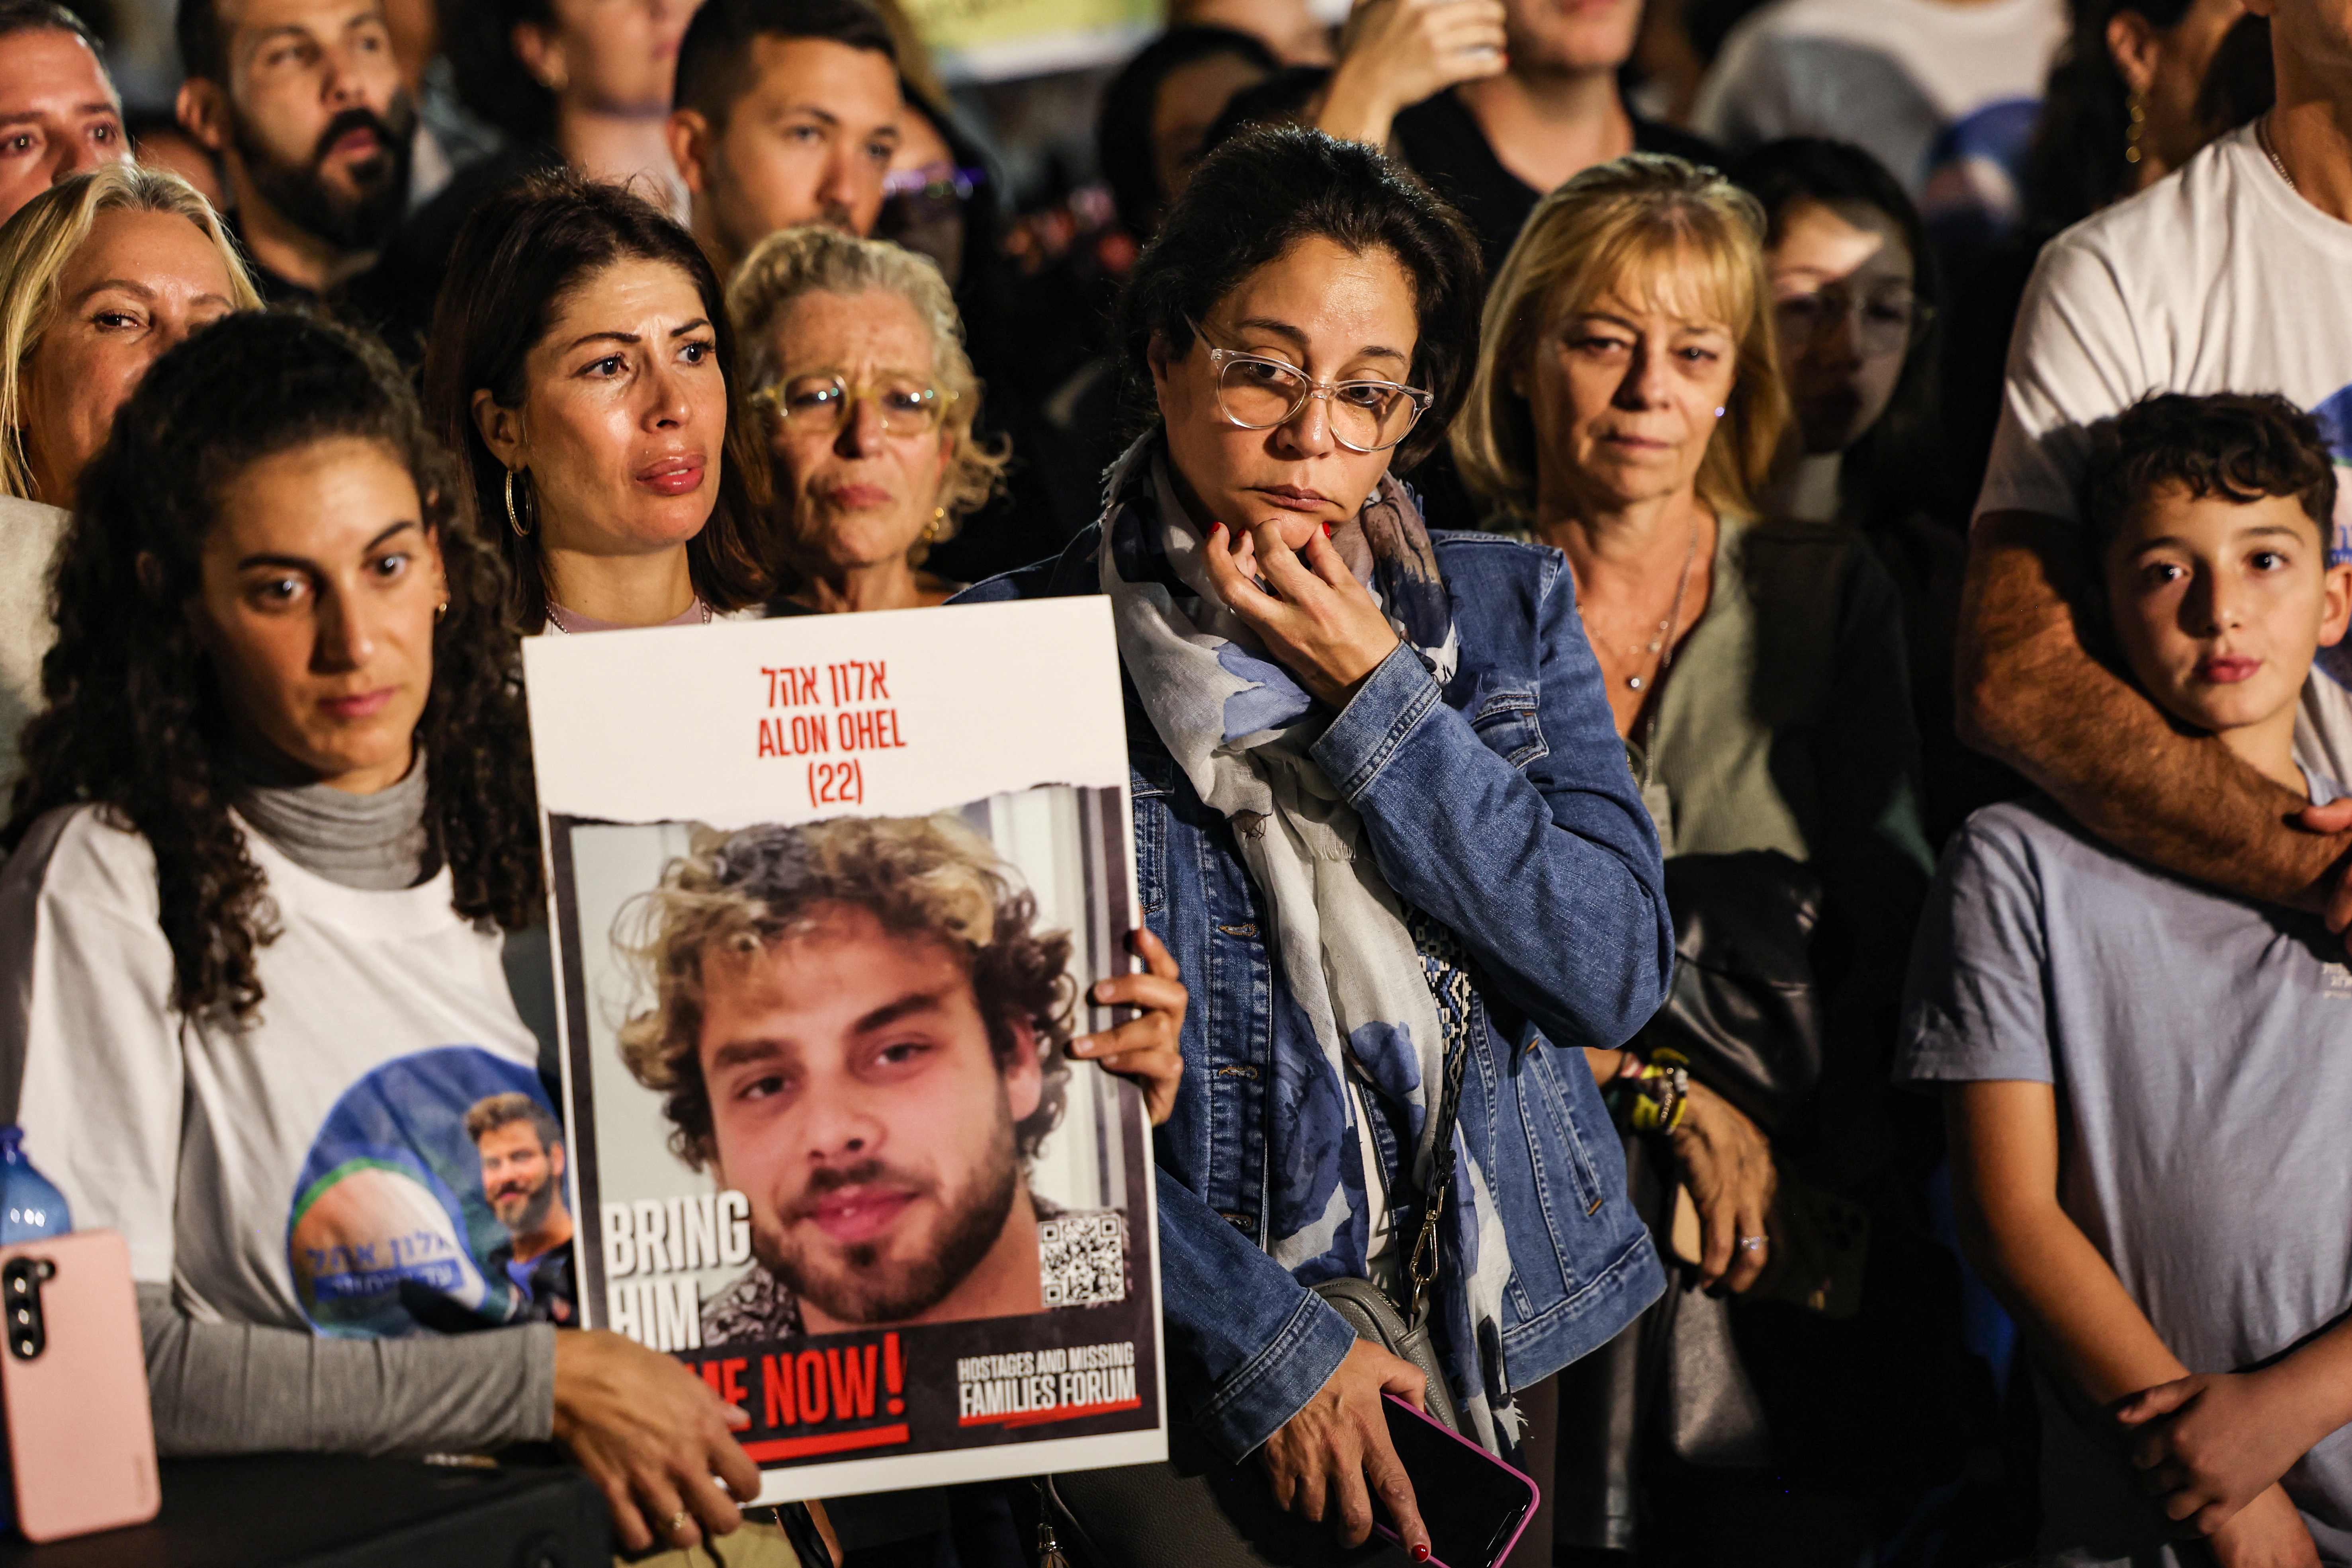 Relatives, friends and supporters of Alon Ohel, who is held hostage by Hamas, take part in a demonstration